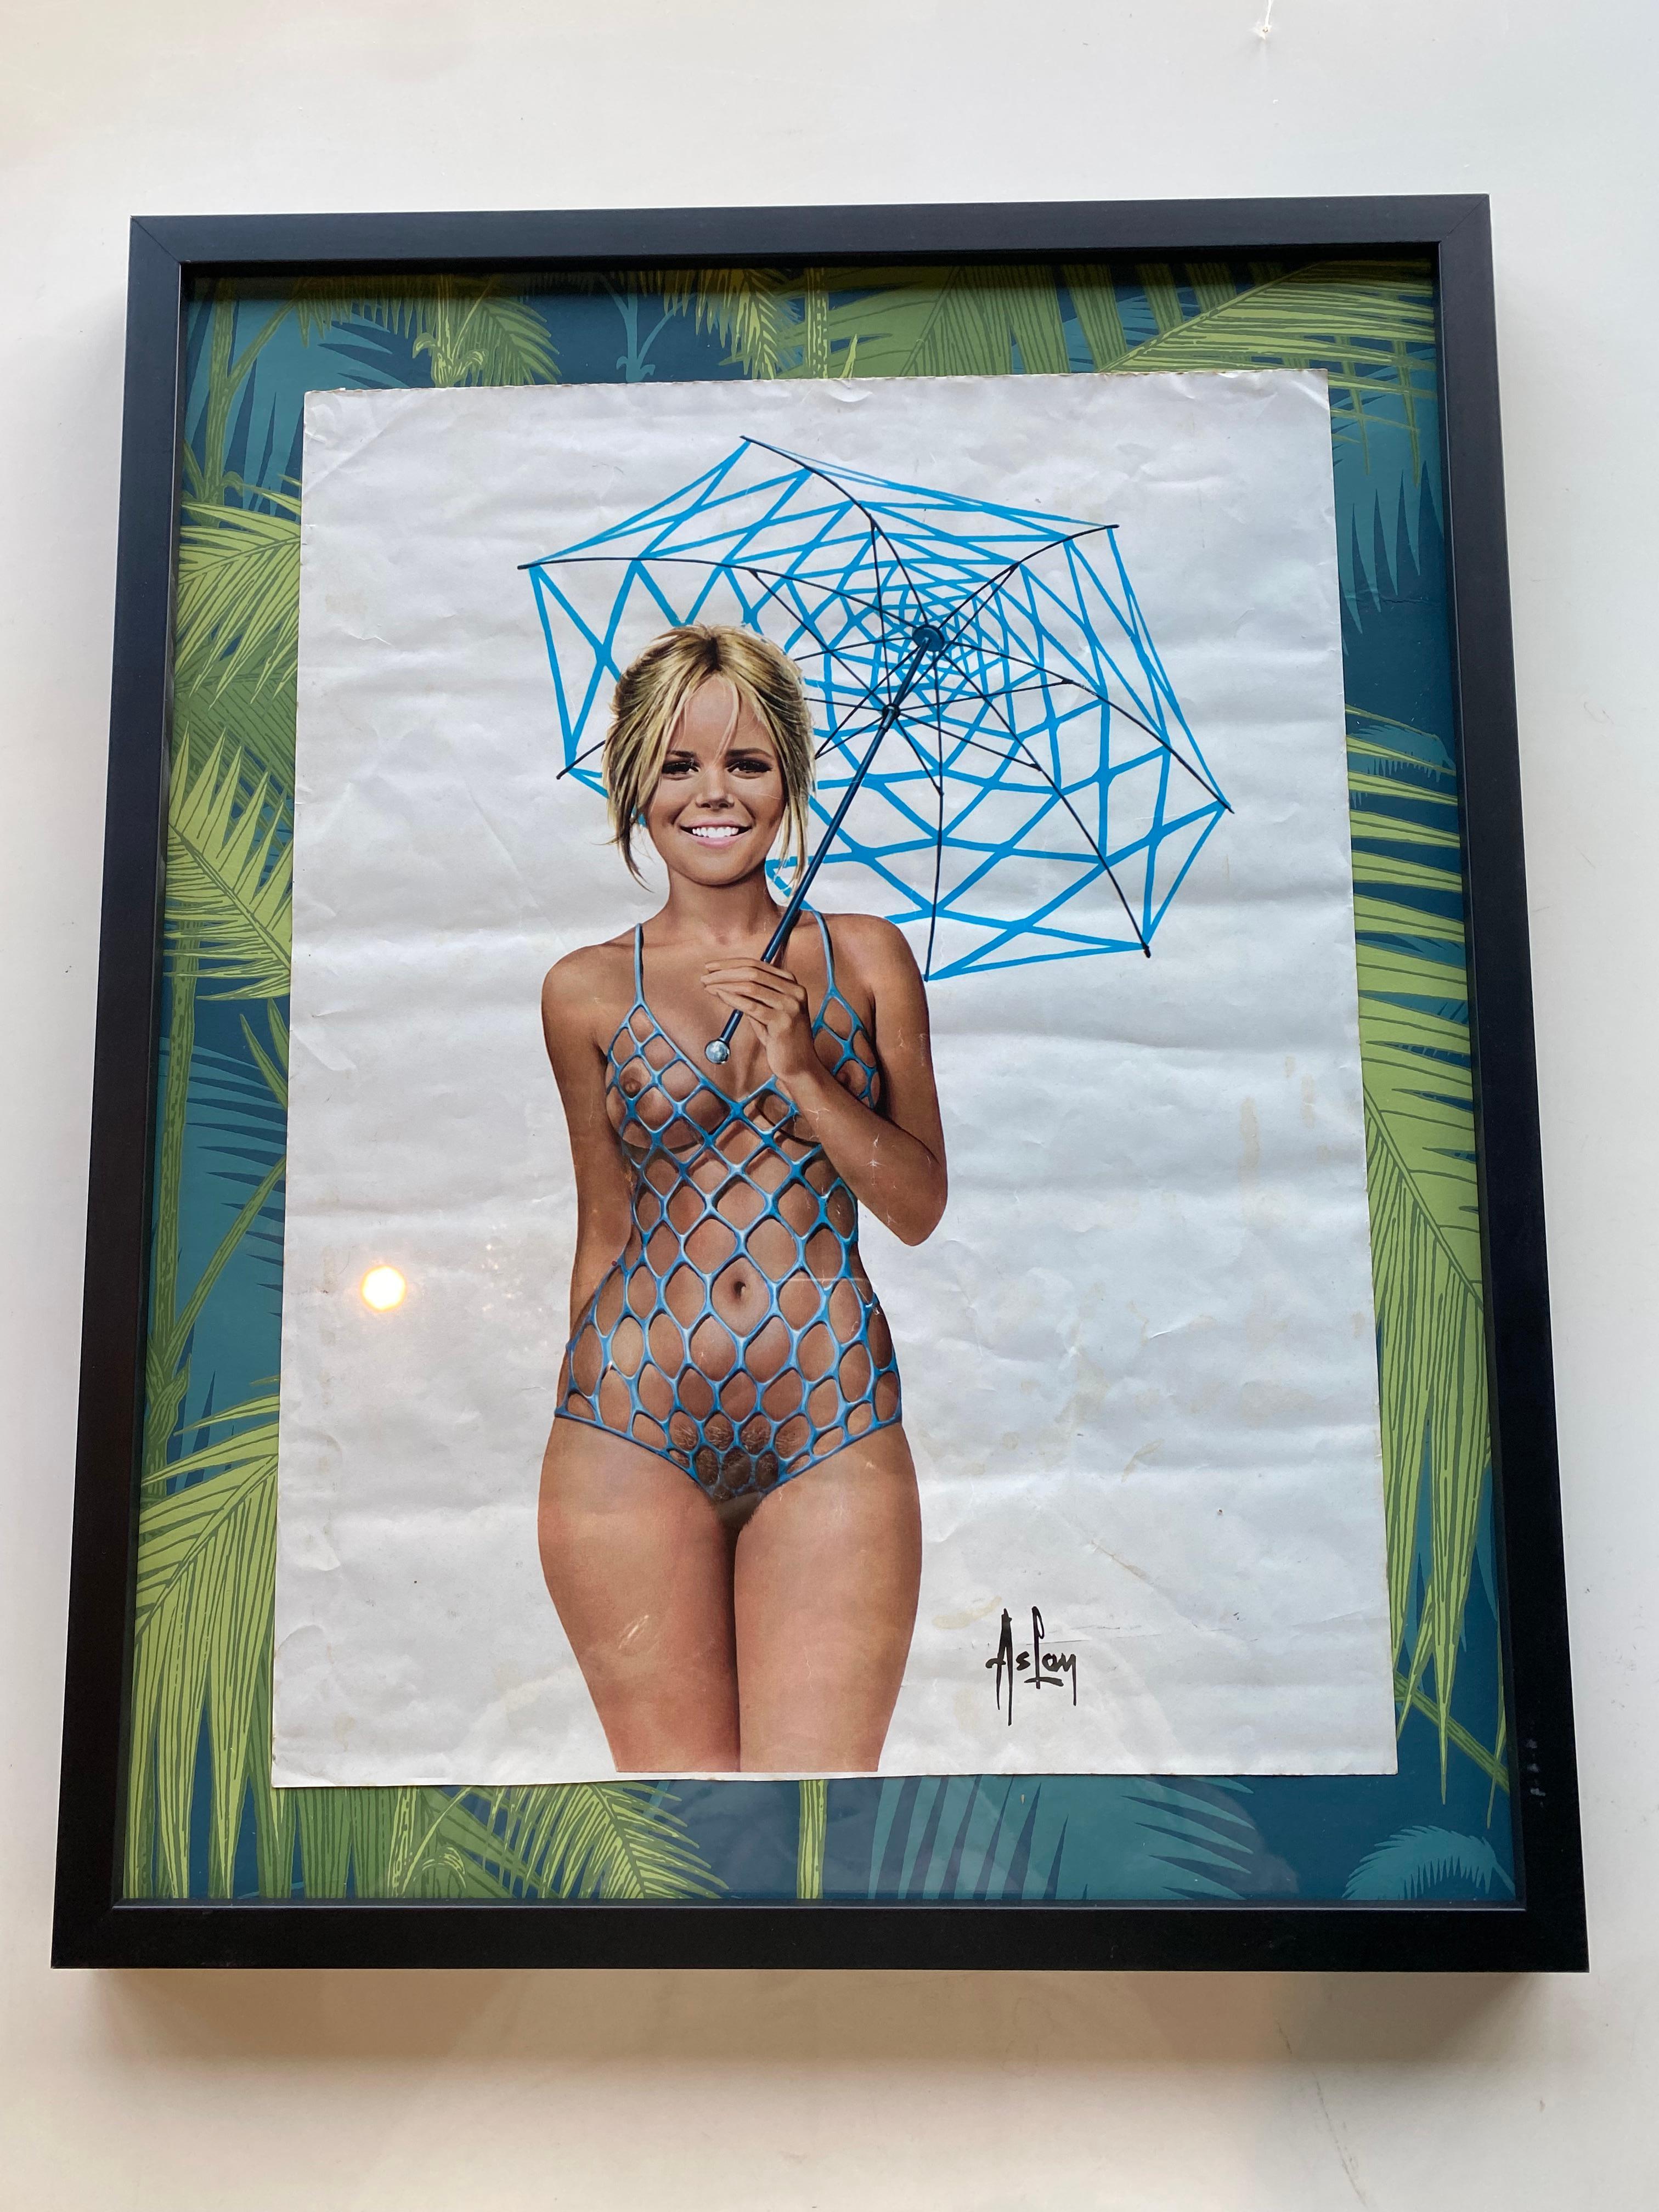 Framed print of a pin up girl circa 1970 by French artist Aslan.
The print of a 1970s pin up girl is framed behind glass and has been placed on a Cole and Son wallpaper. The offset print is quite worn and creased.
Aslan (born Alain Gourdon), (23